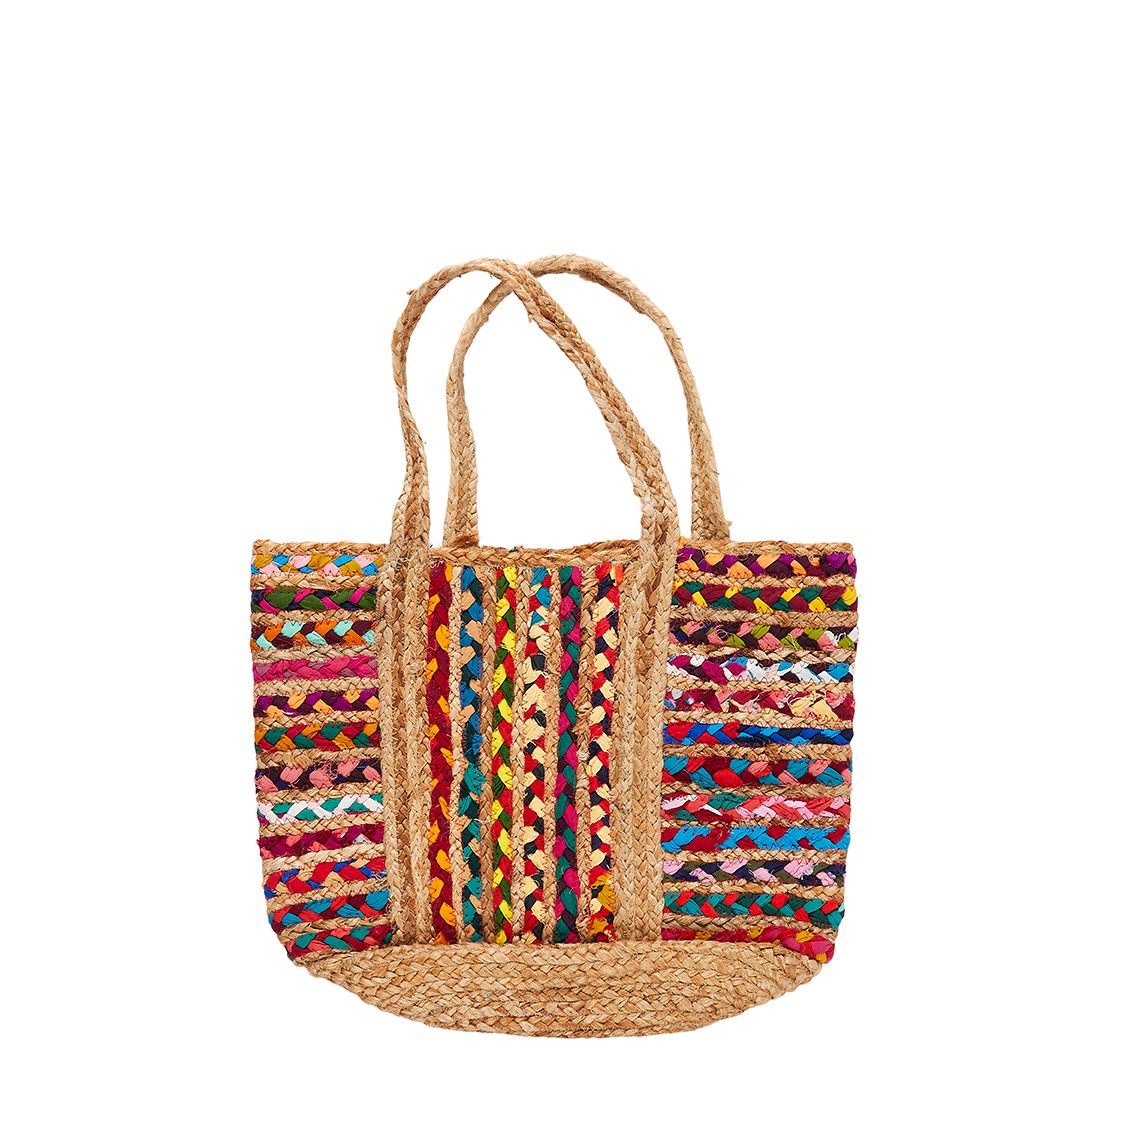 RECYCLED MULTI COLORED FABRIC BRAIDED JUTE BEACH ECO-TOTE